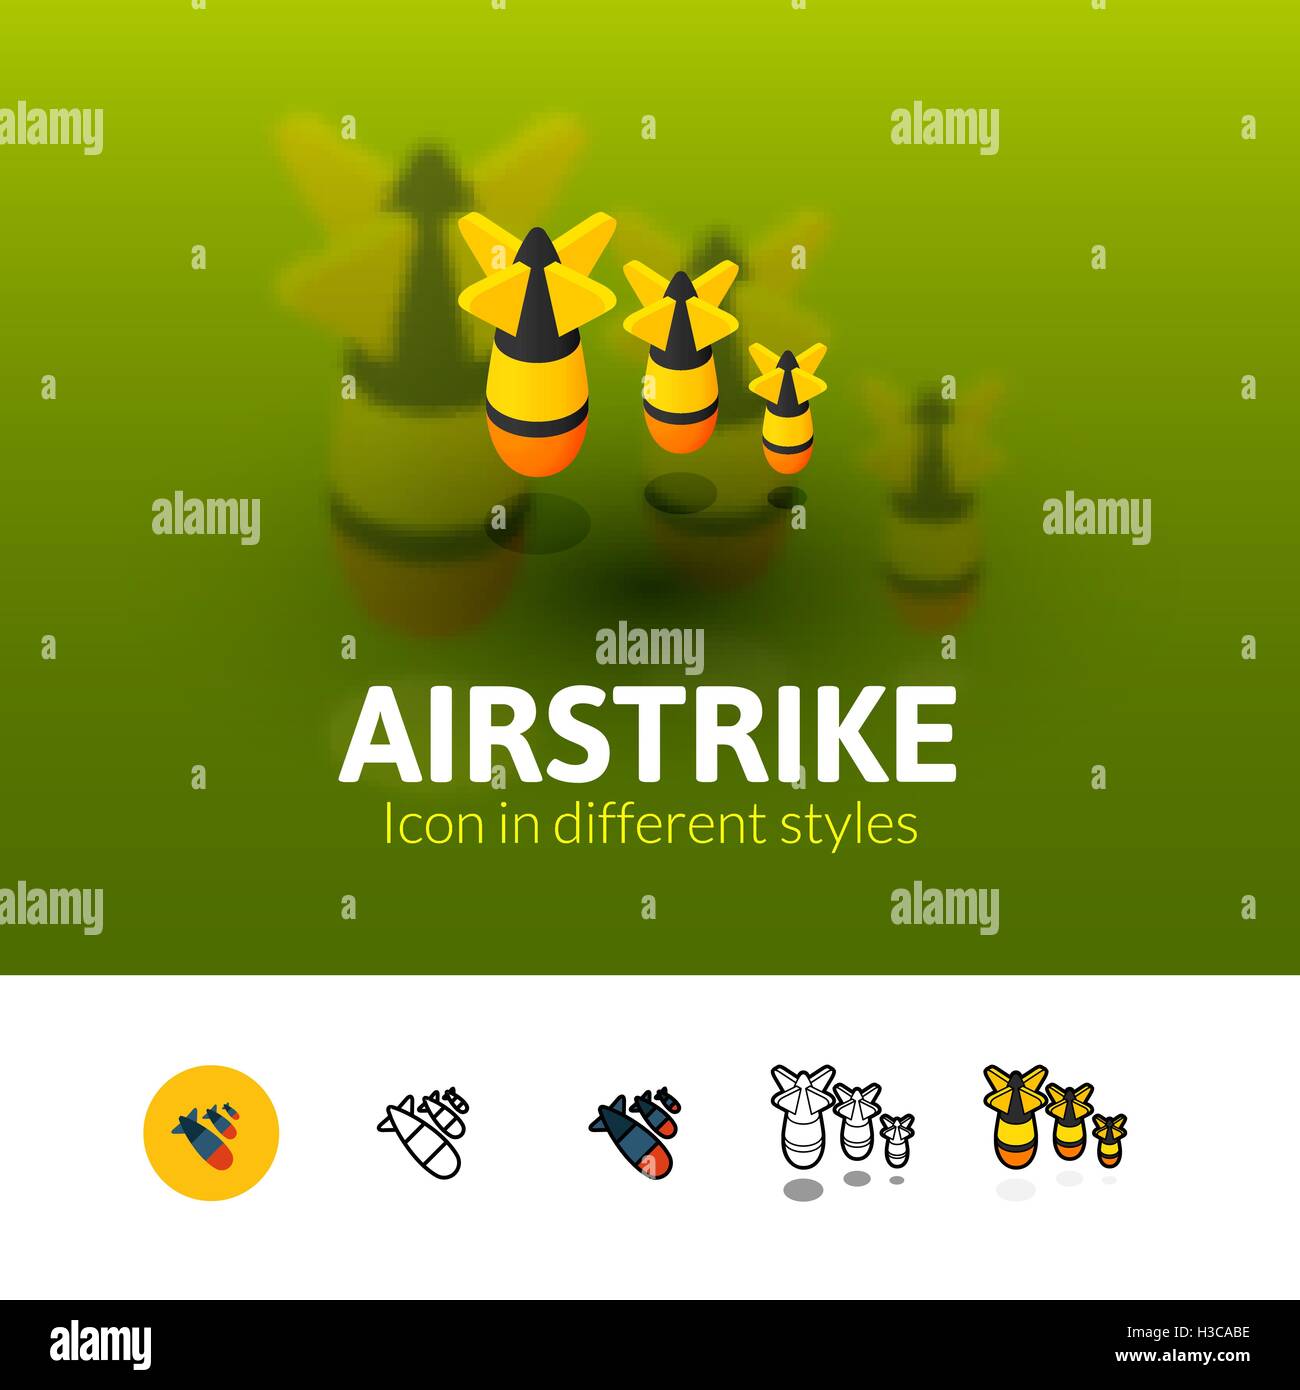 Airstrike icon in different style Stock Vector